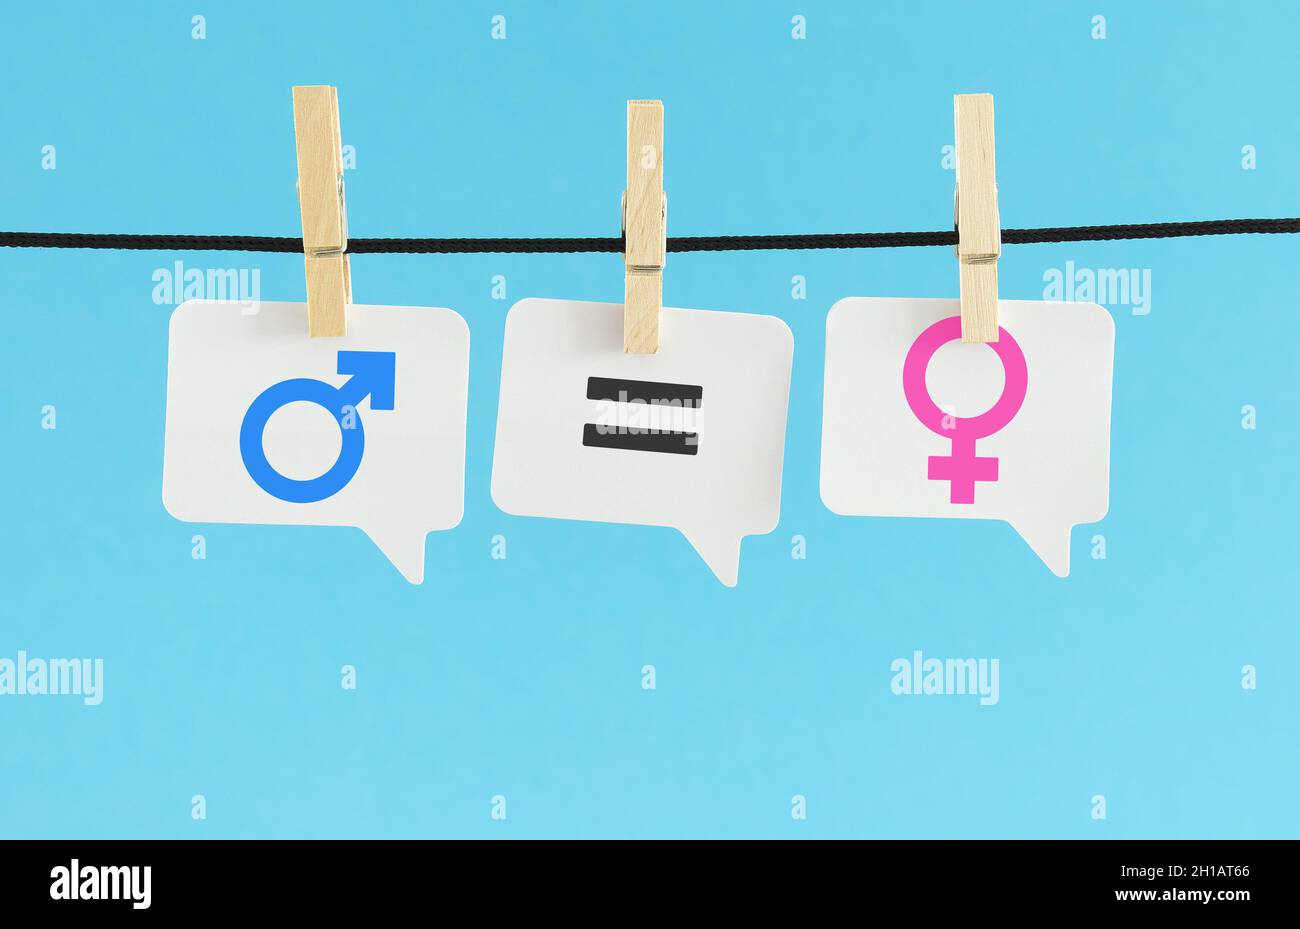 Gender equality, sexism and sexual equality concept with a blue male and a pink female icon and the equal to sign symbols on white paper speech bubble Stock Photo